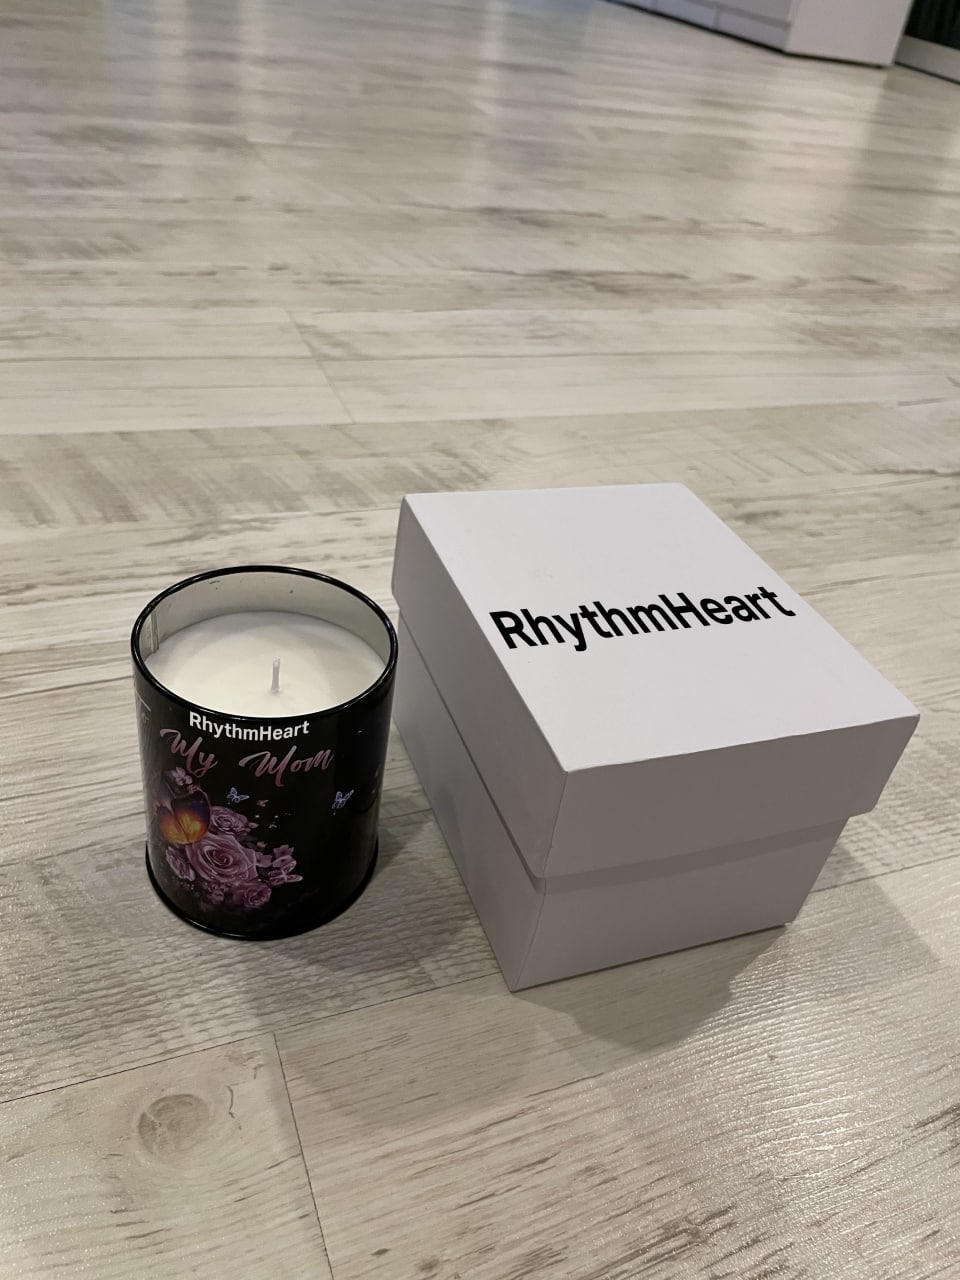 RHYTHMHEART Candle Gifts for Mom, Birthday Gifts for Mom - Erosi